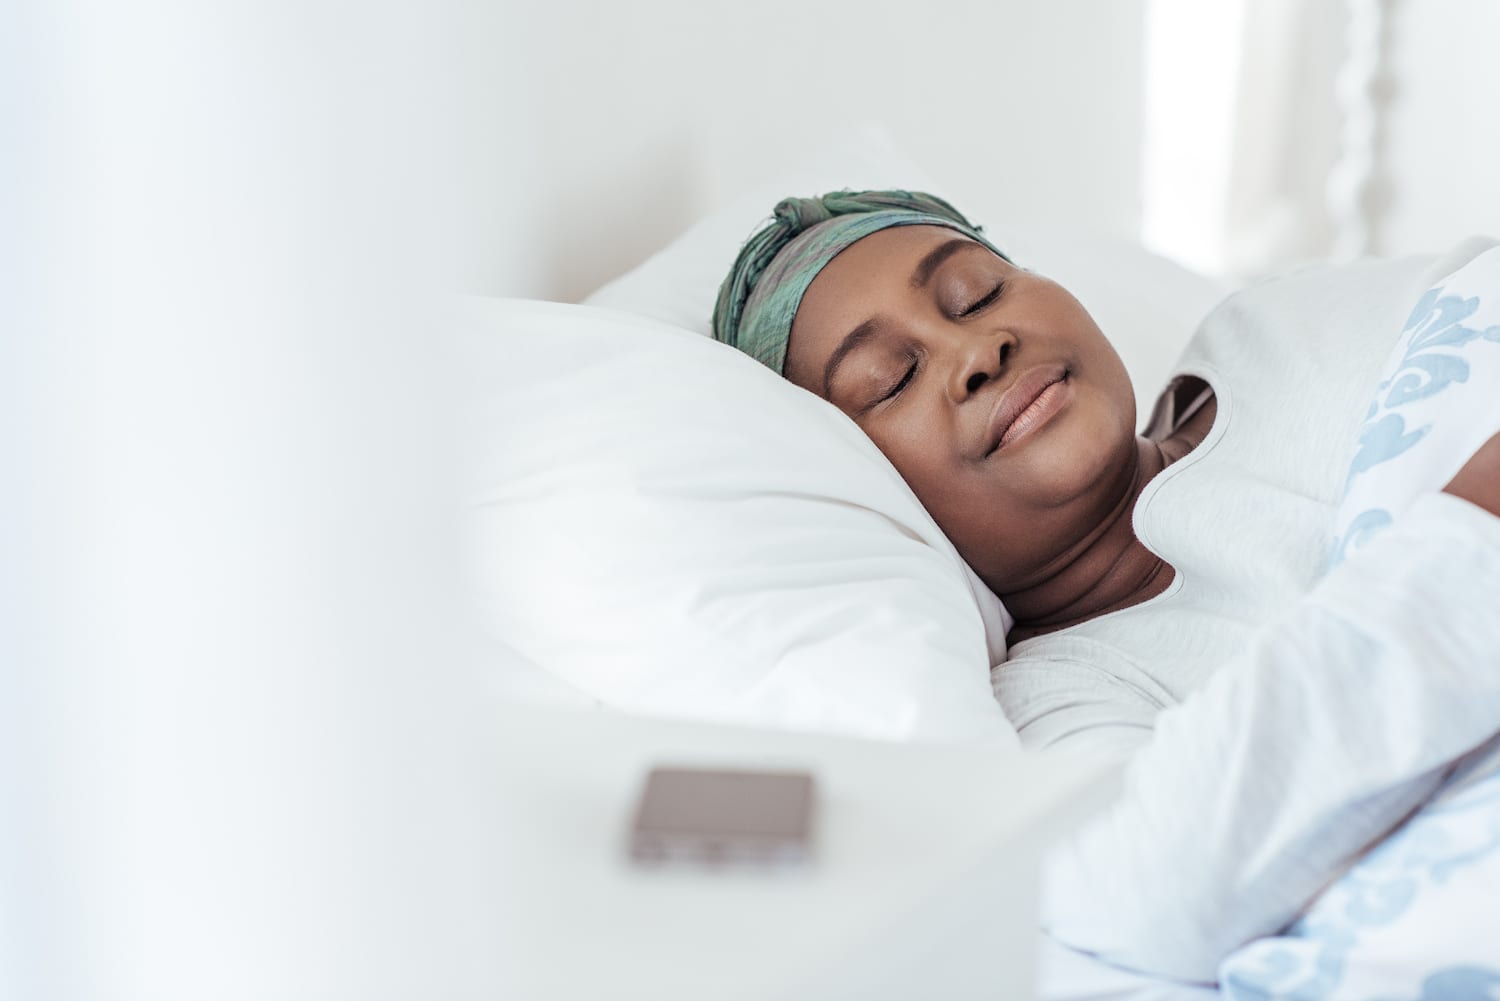 Stock image of a woman sleeping in bed